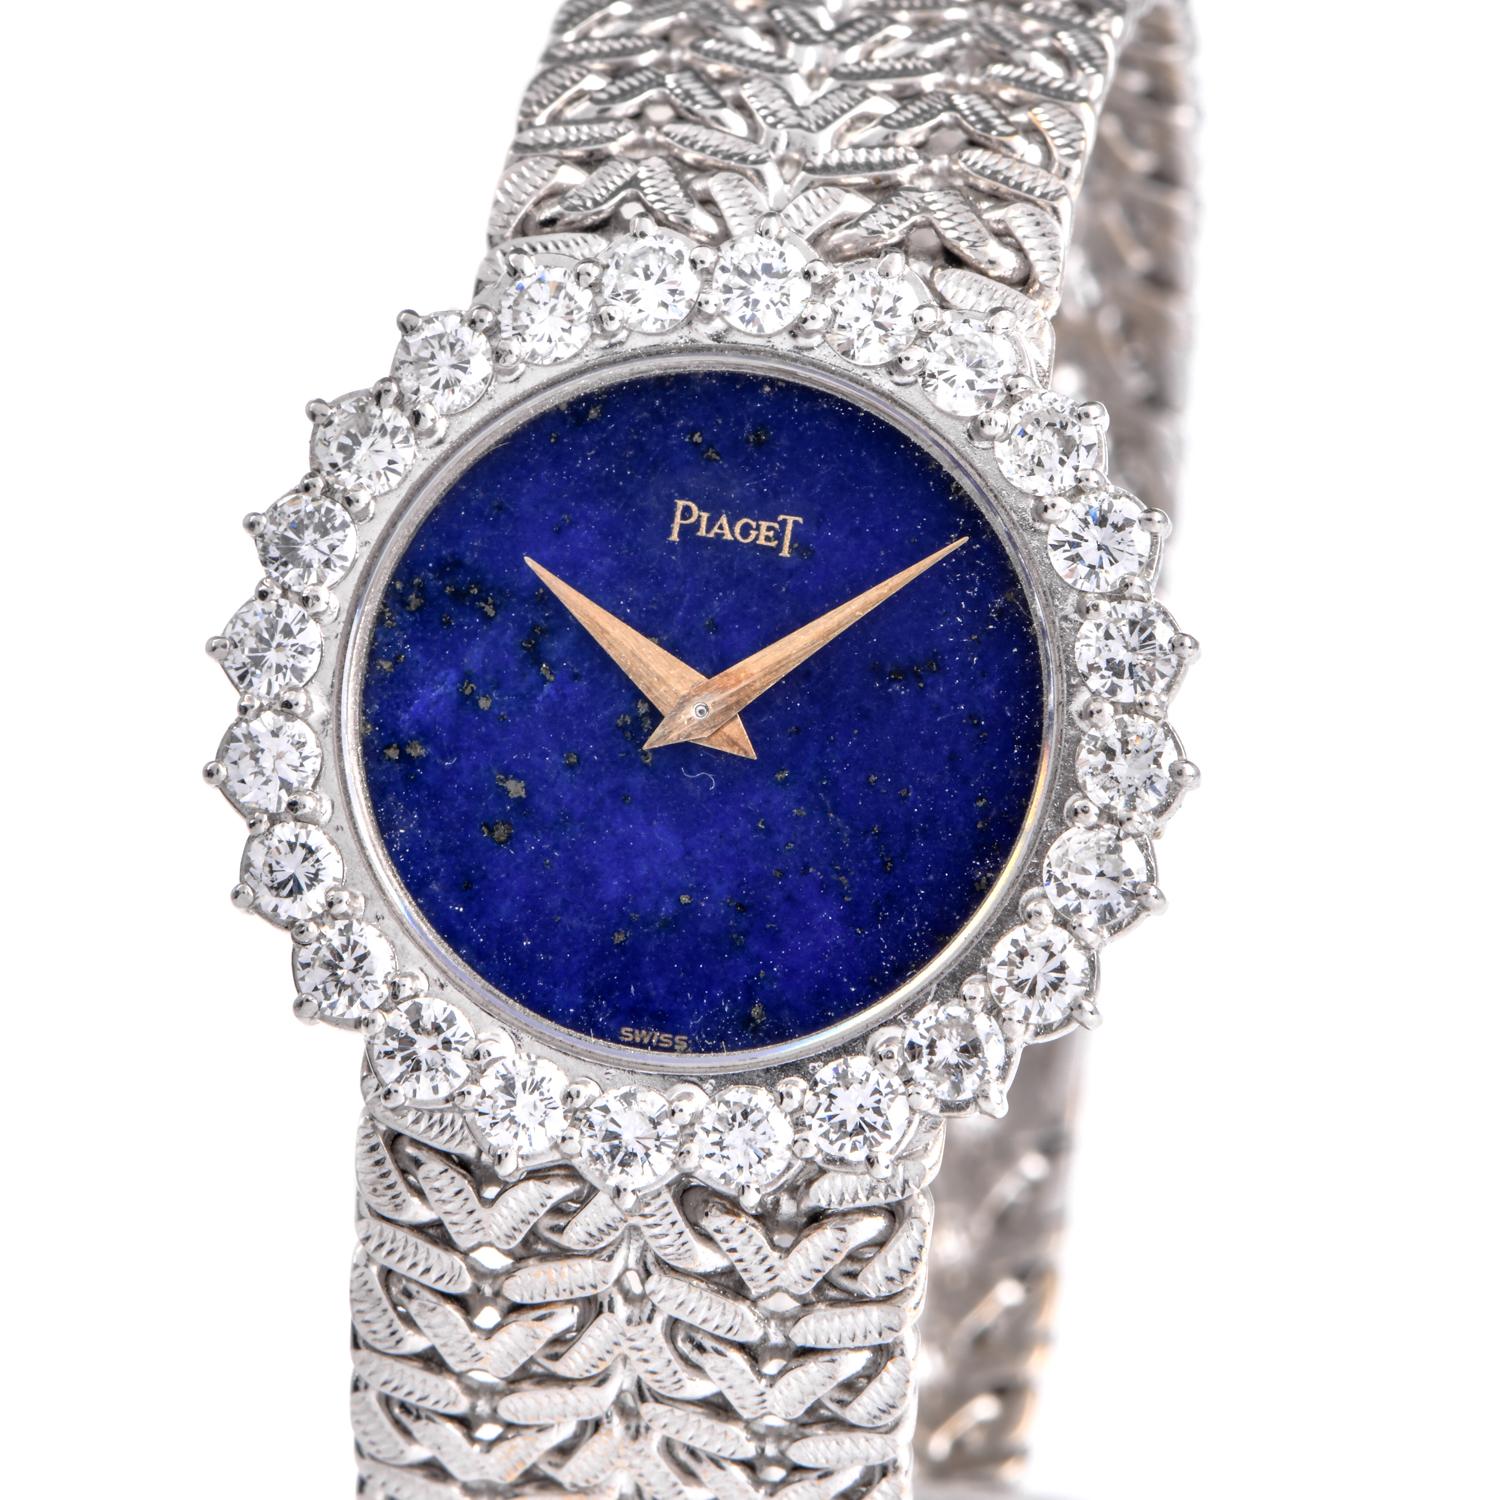 This stunning Vintage wristwatch from the renowned luxury brand, Piaget, is celebrated for its exceptional timepieces and exquisite jewelry. This timepiece showcases a 28mm Lapis dial, expertly crafted in 18K white gold, adorned with round brilliant